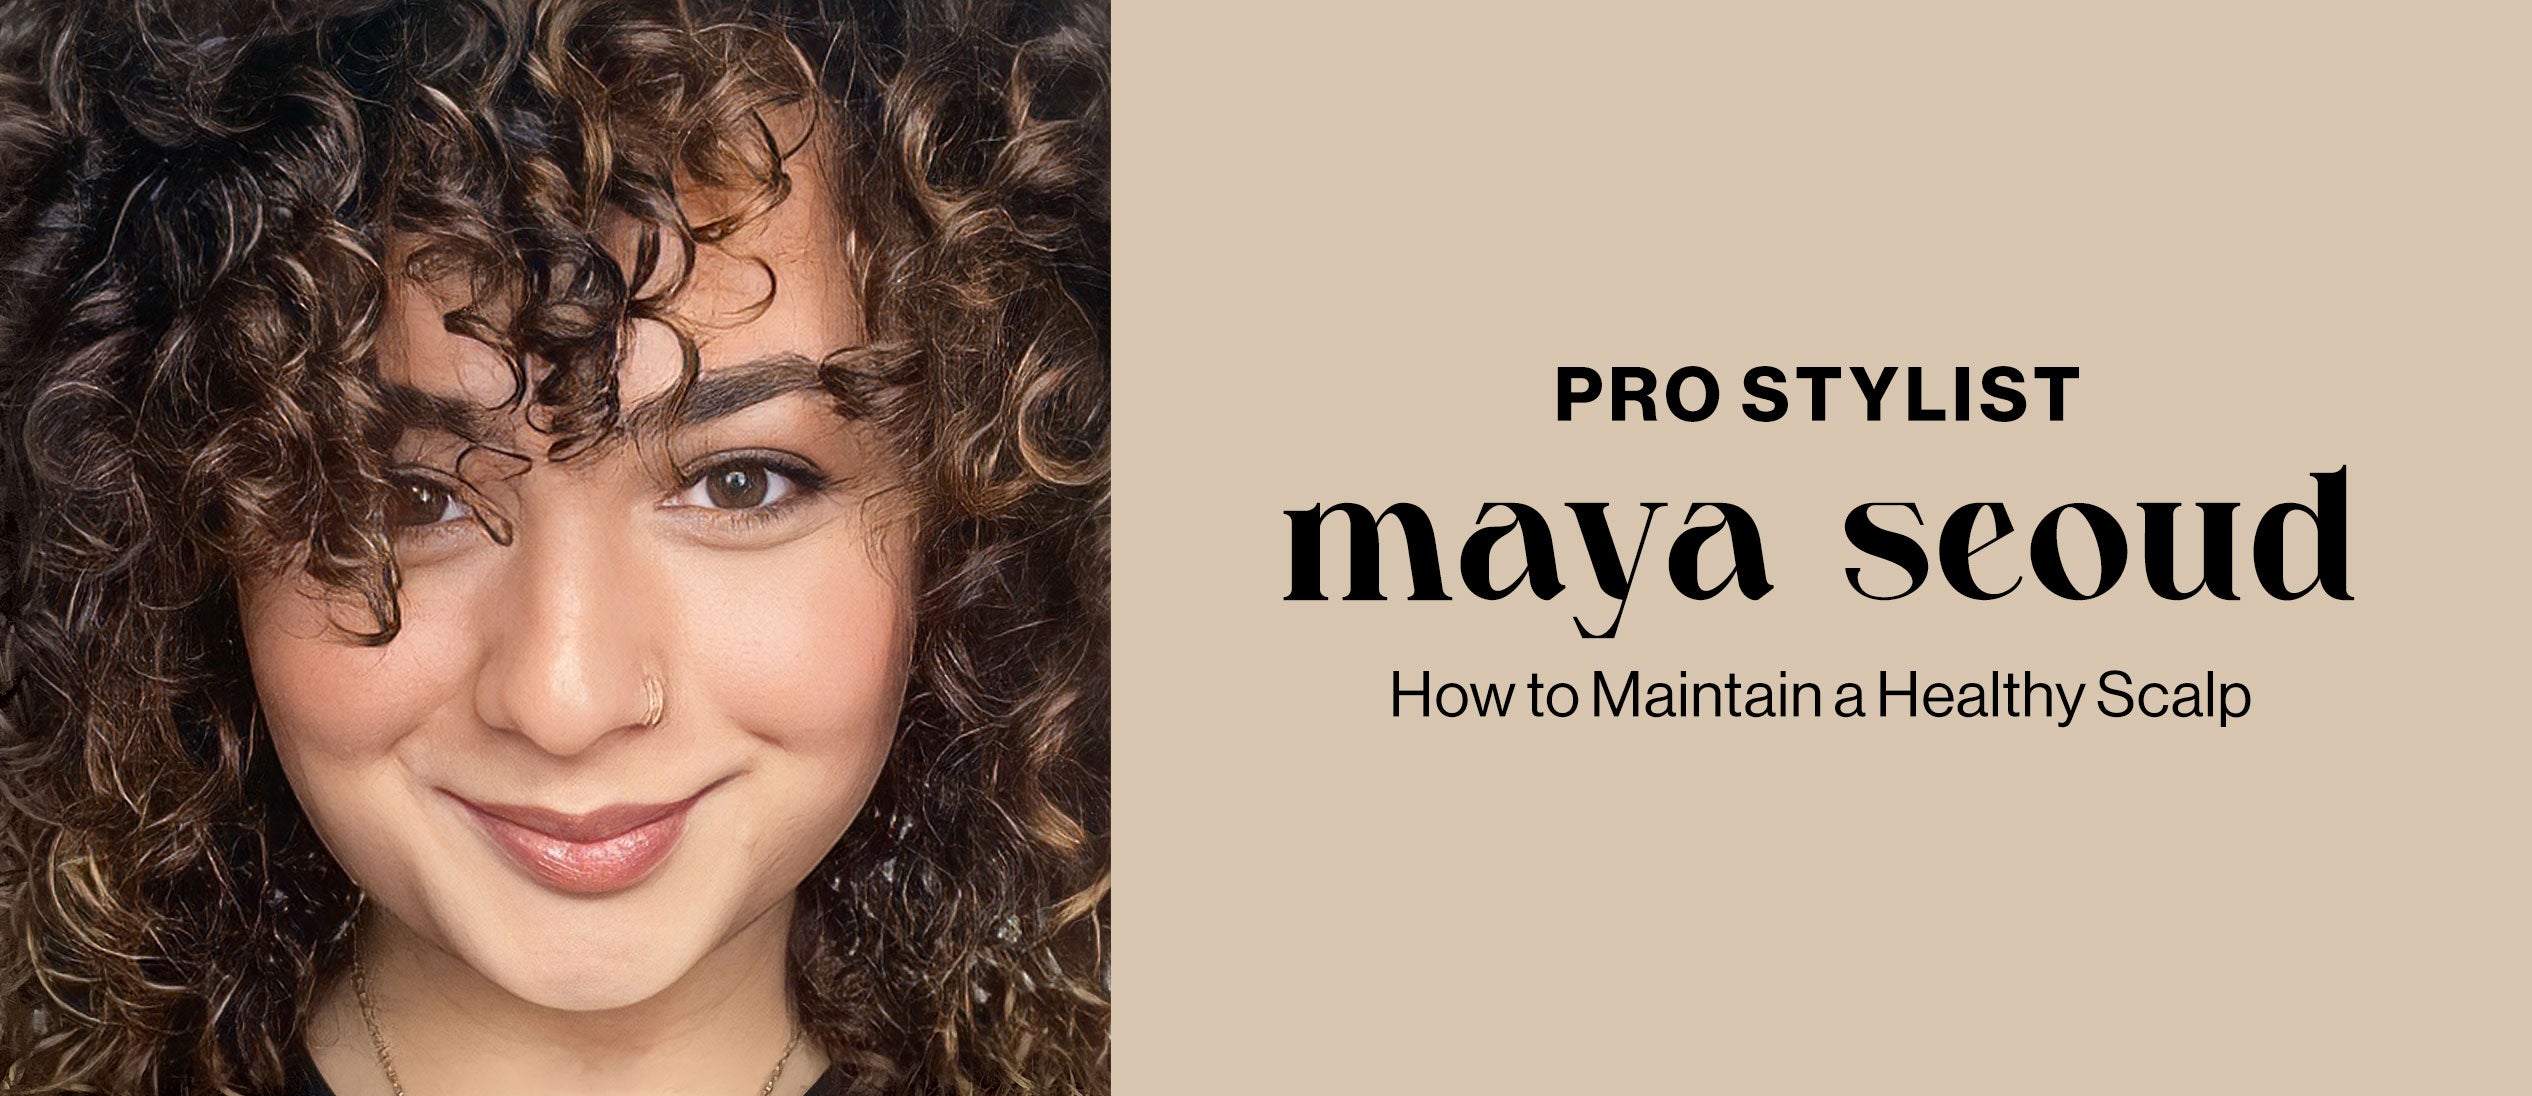 Professional Hairstylist Maya Seoud - How to Maintain a Healthy Scalp